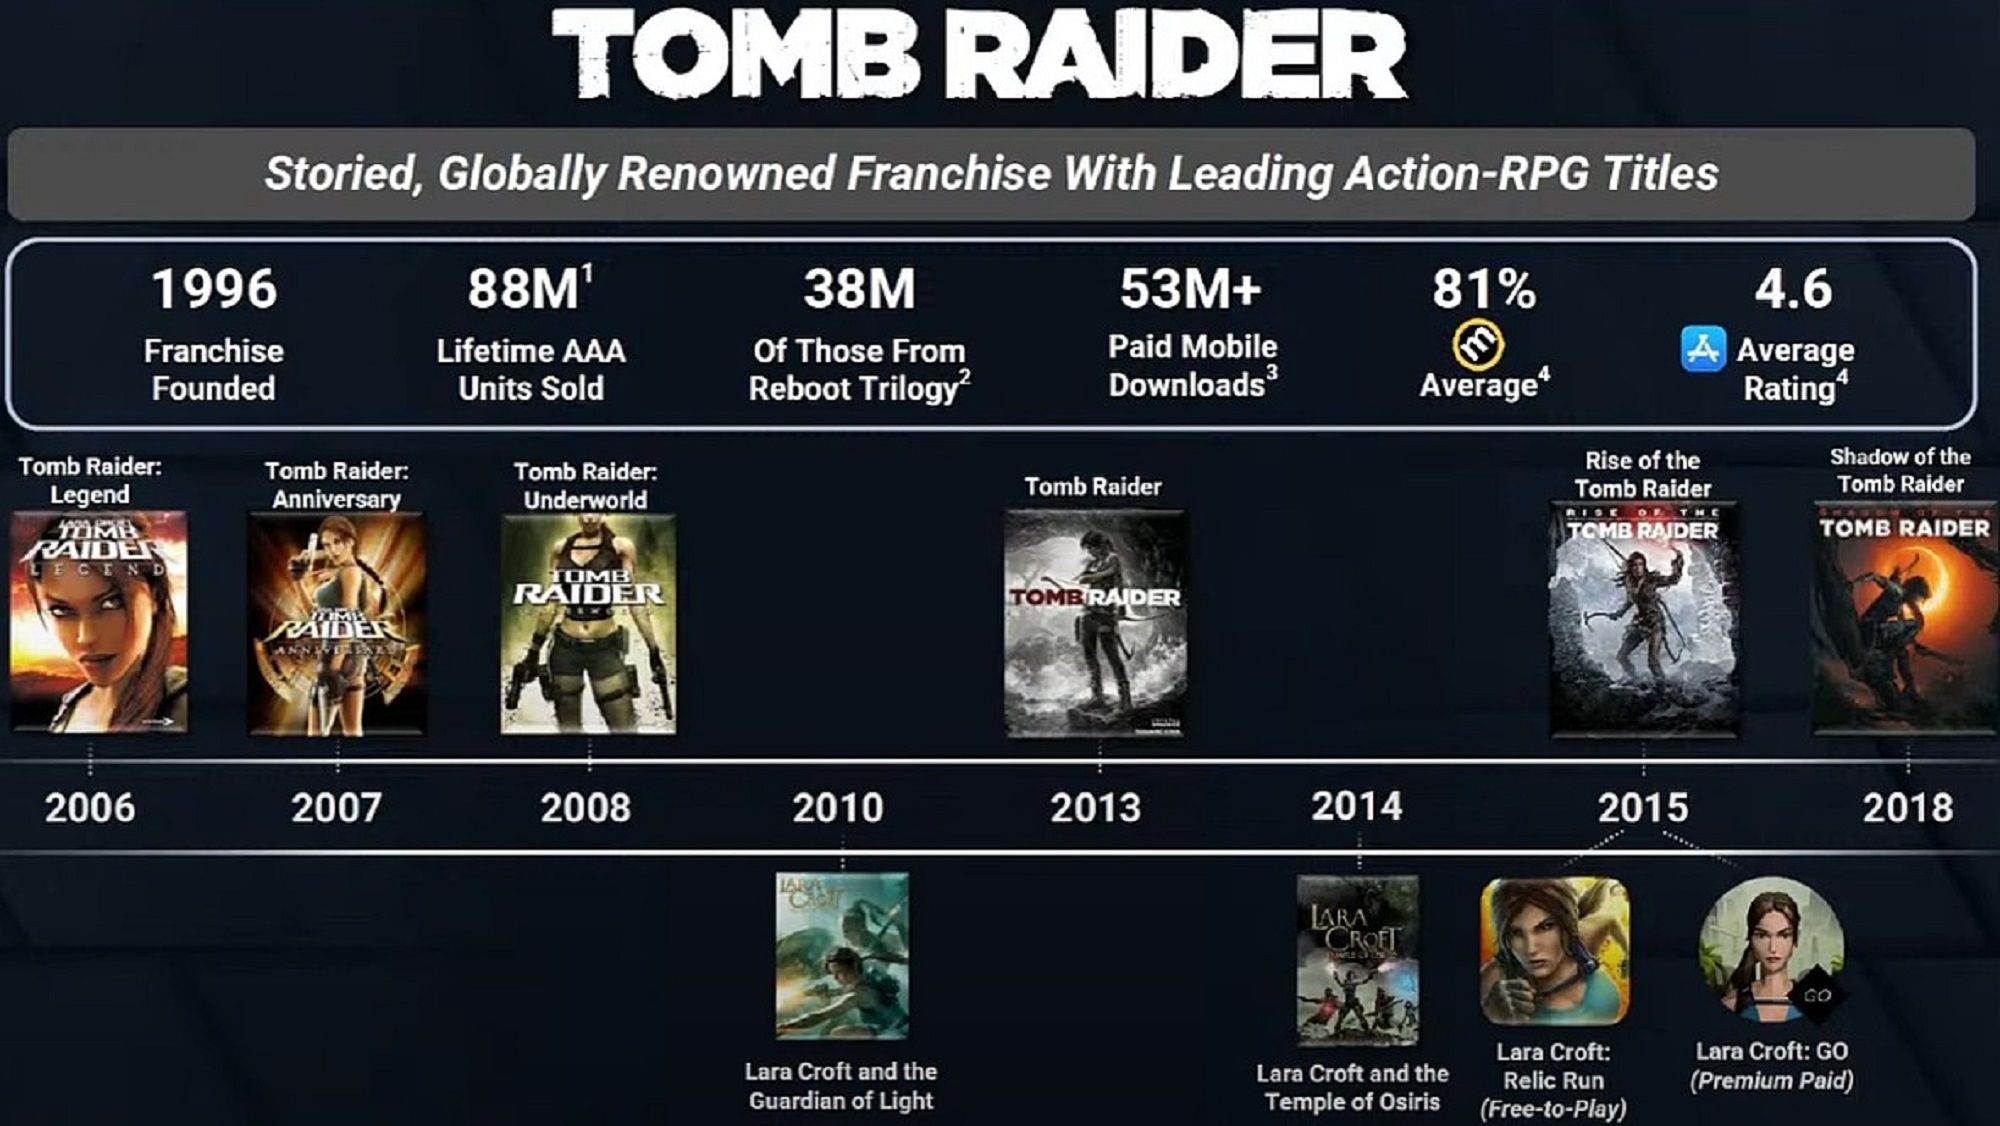 Timeline Of The Tomb Raider Games With The Sales Figures